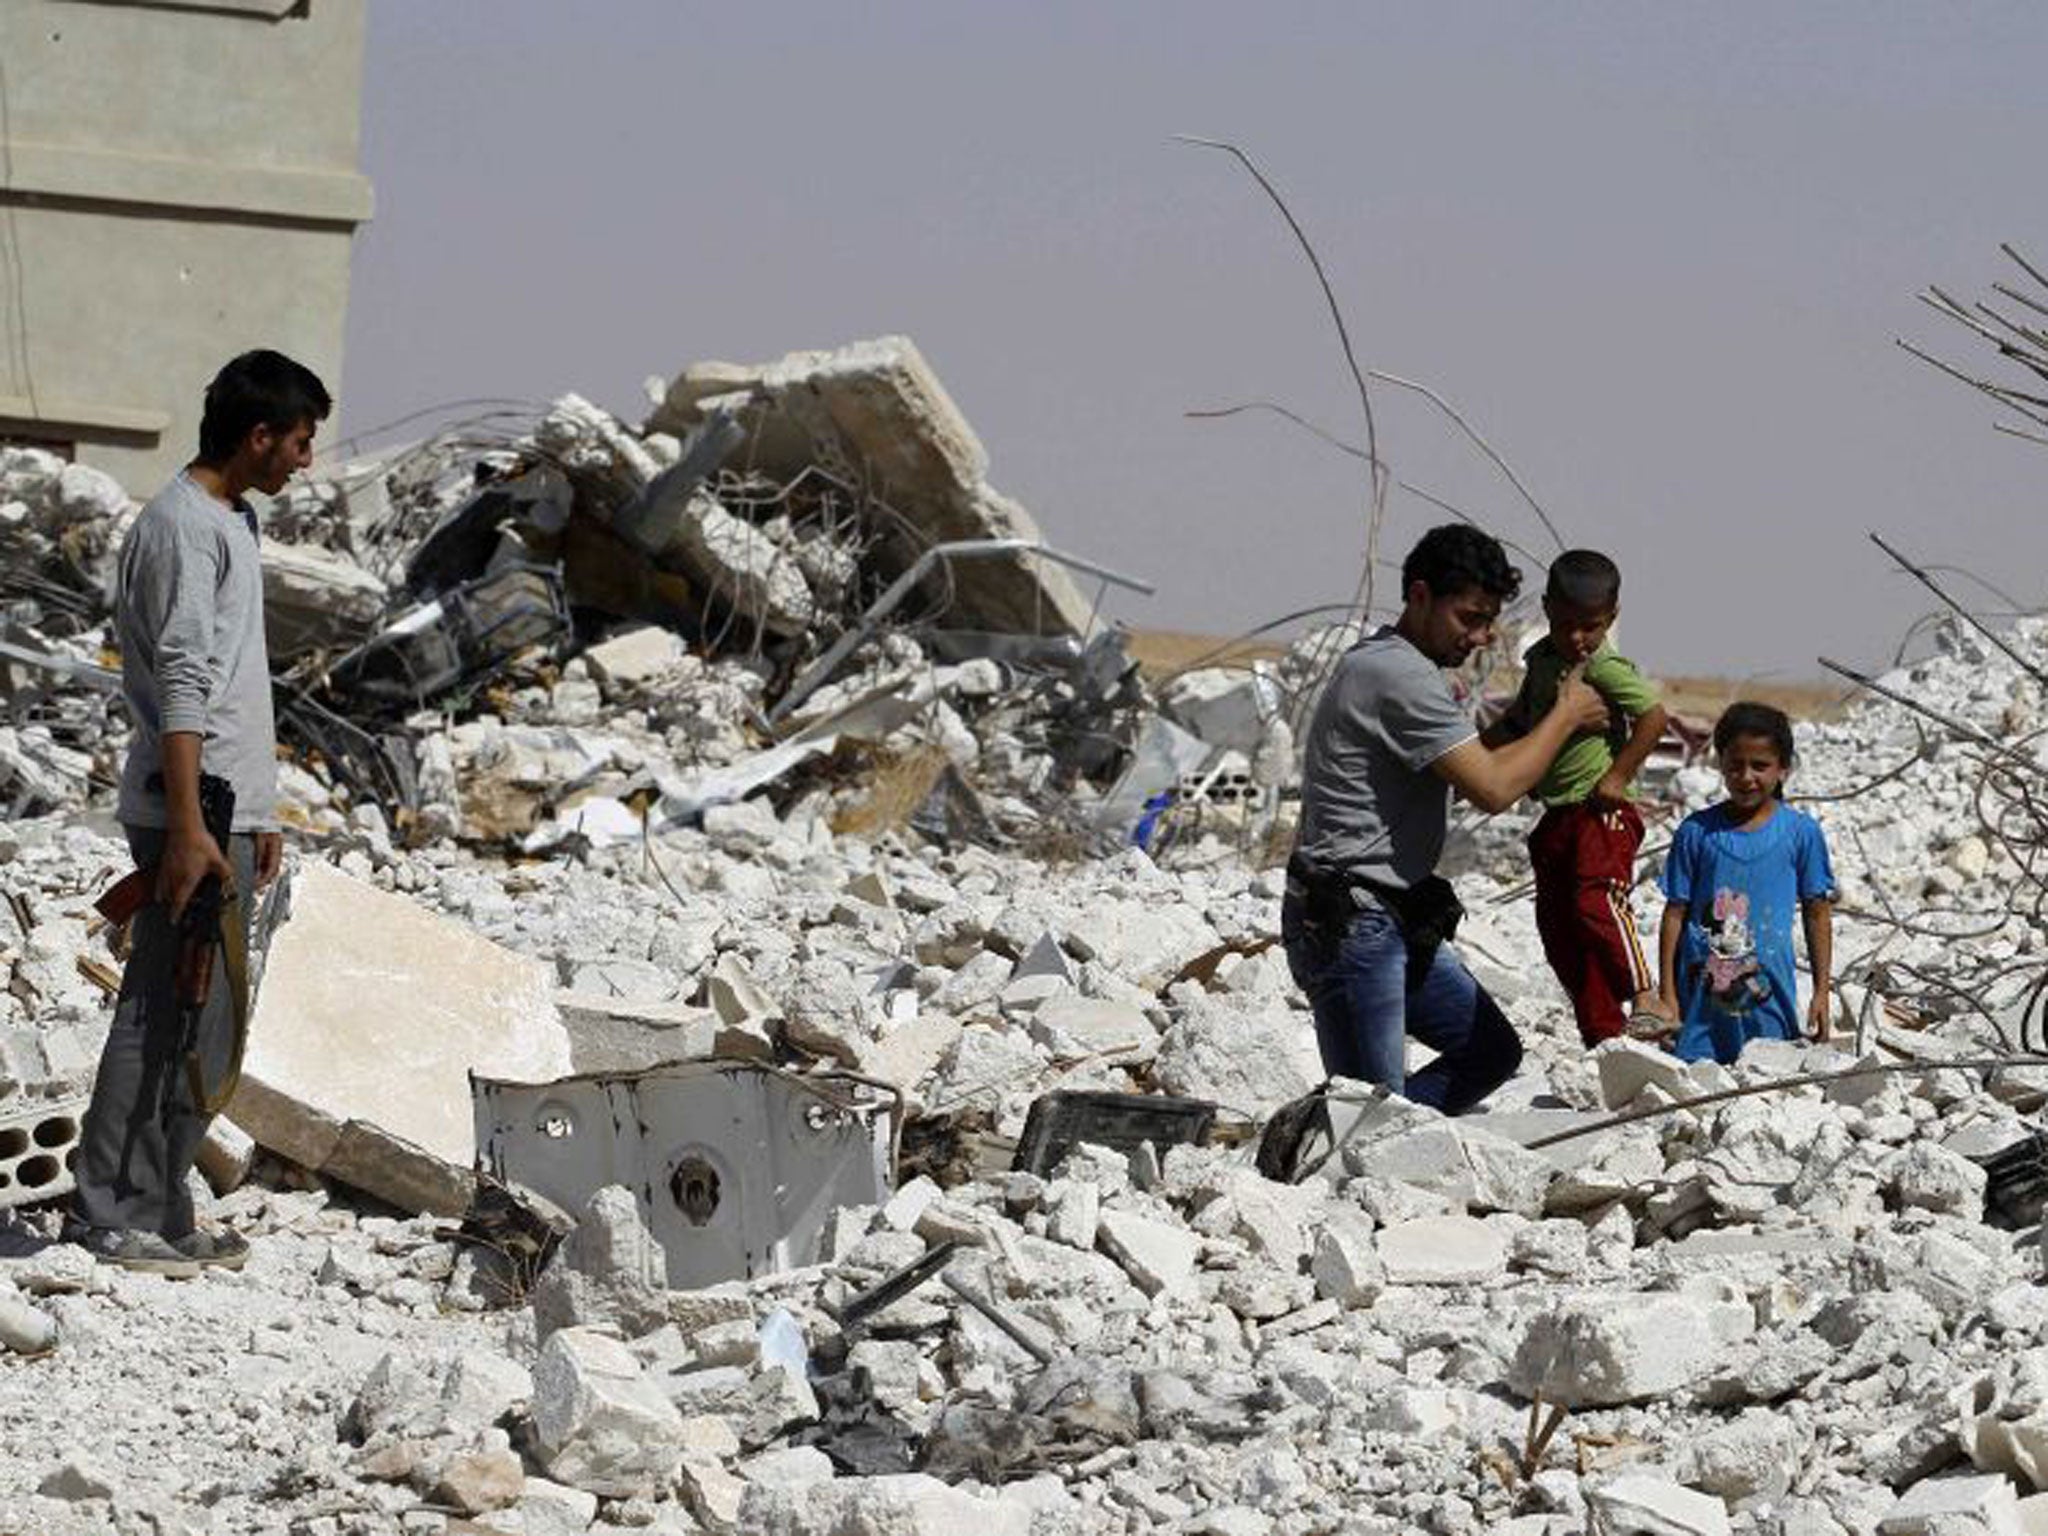 A man helps a boy through rubble in the eastern Hama countryside